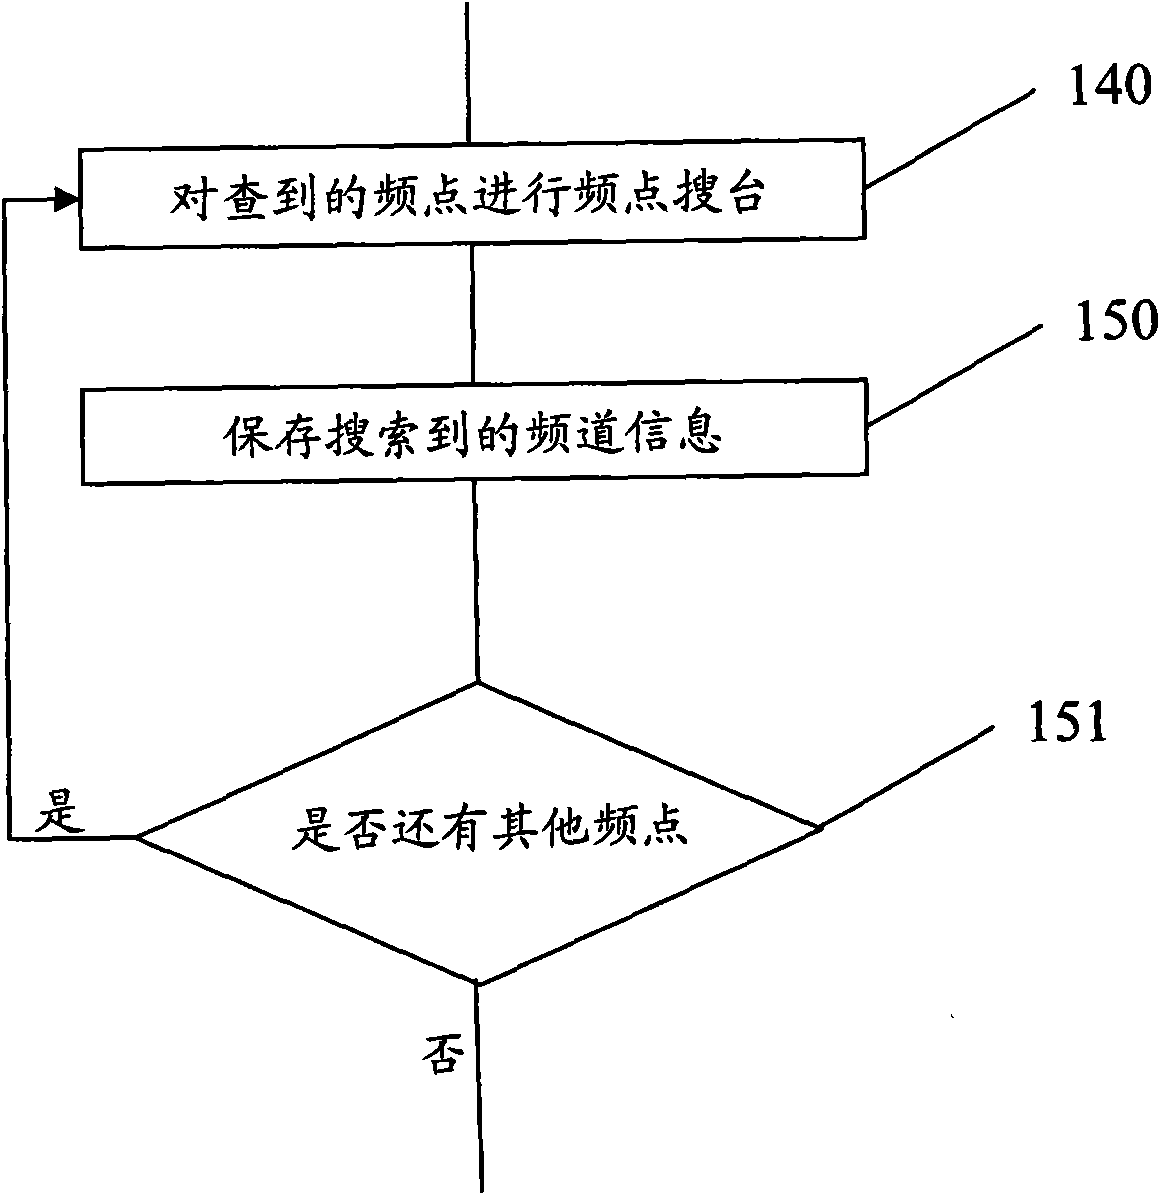 Method for searching for mobile phone television channels